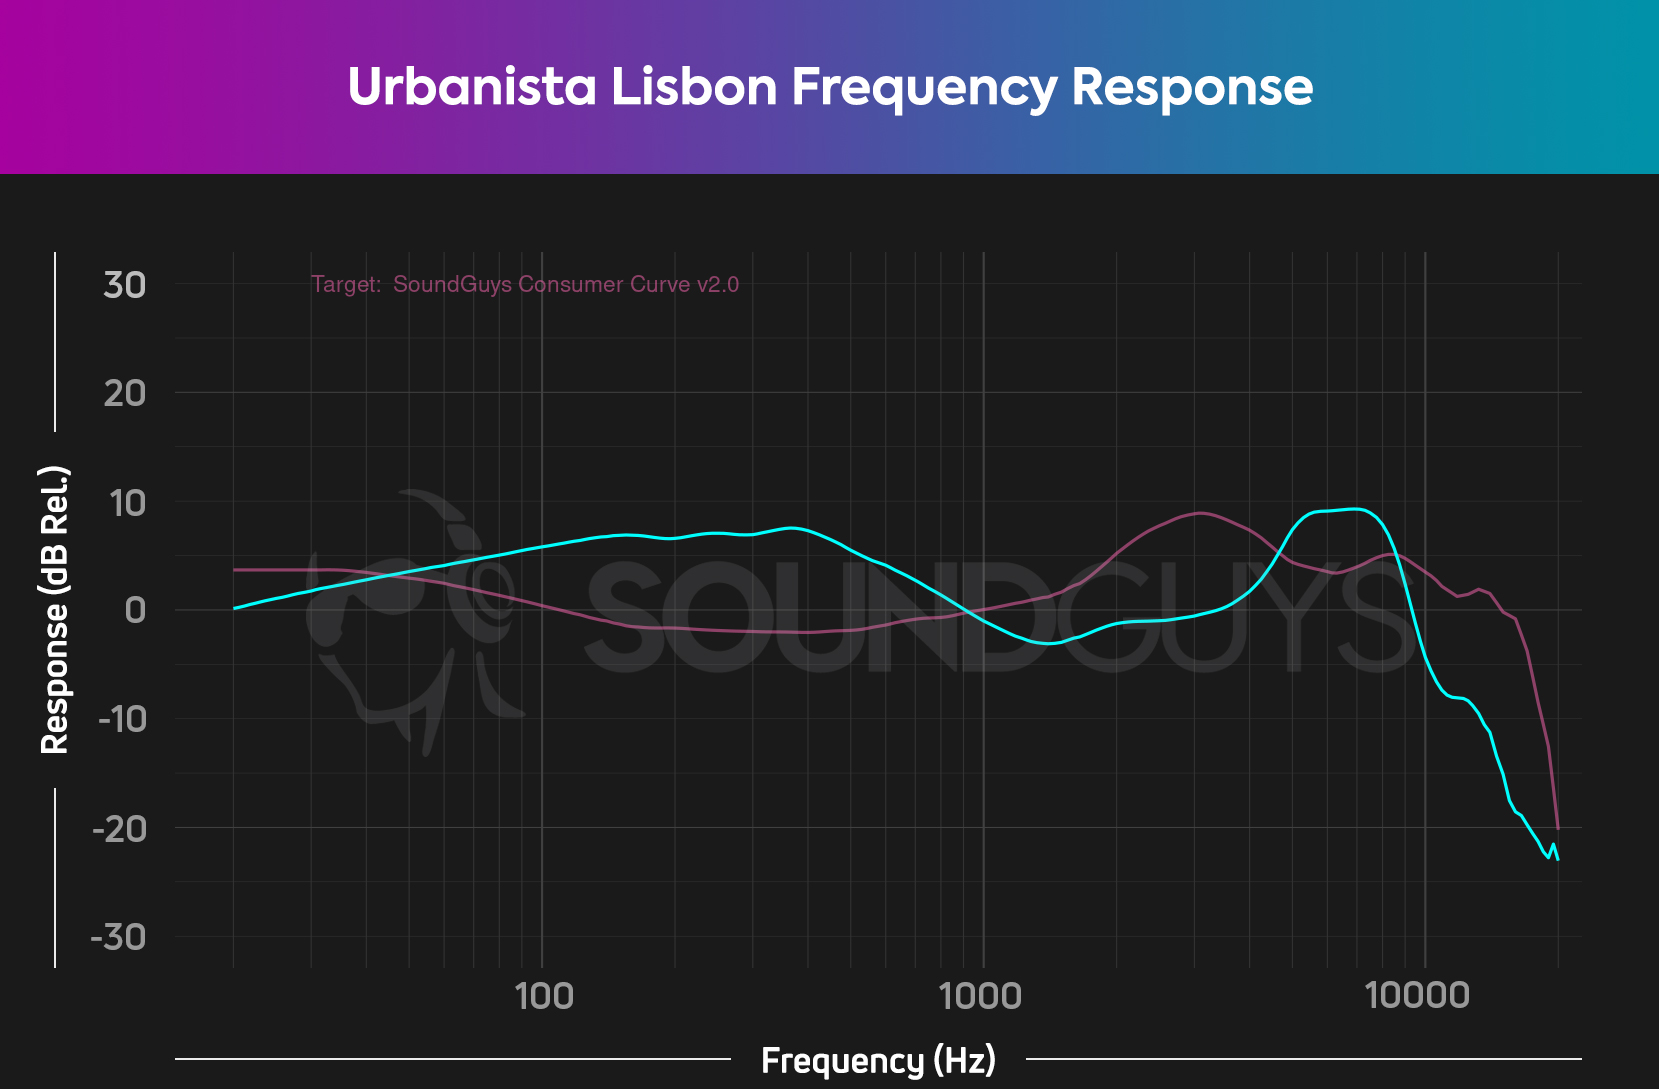 Chart shows the frequency response of the Urbanista Lisbon compared with the target curve.